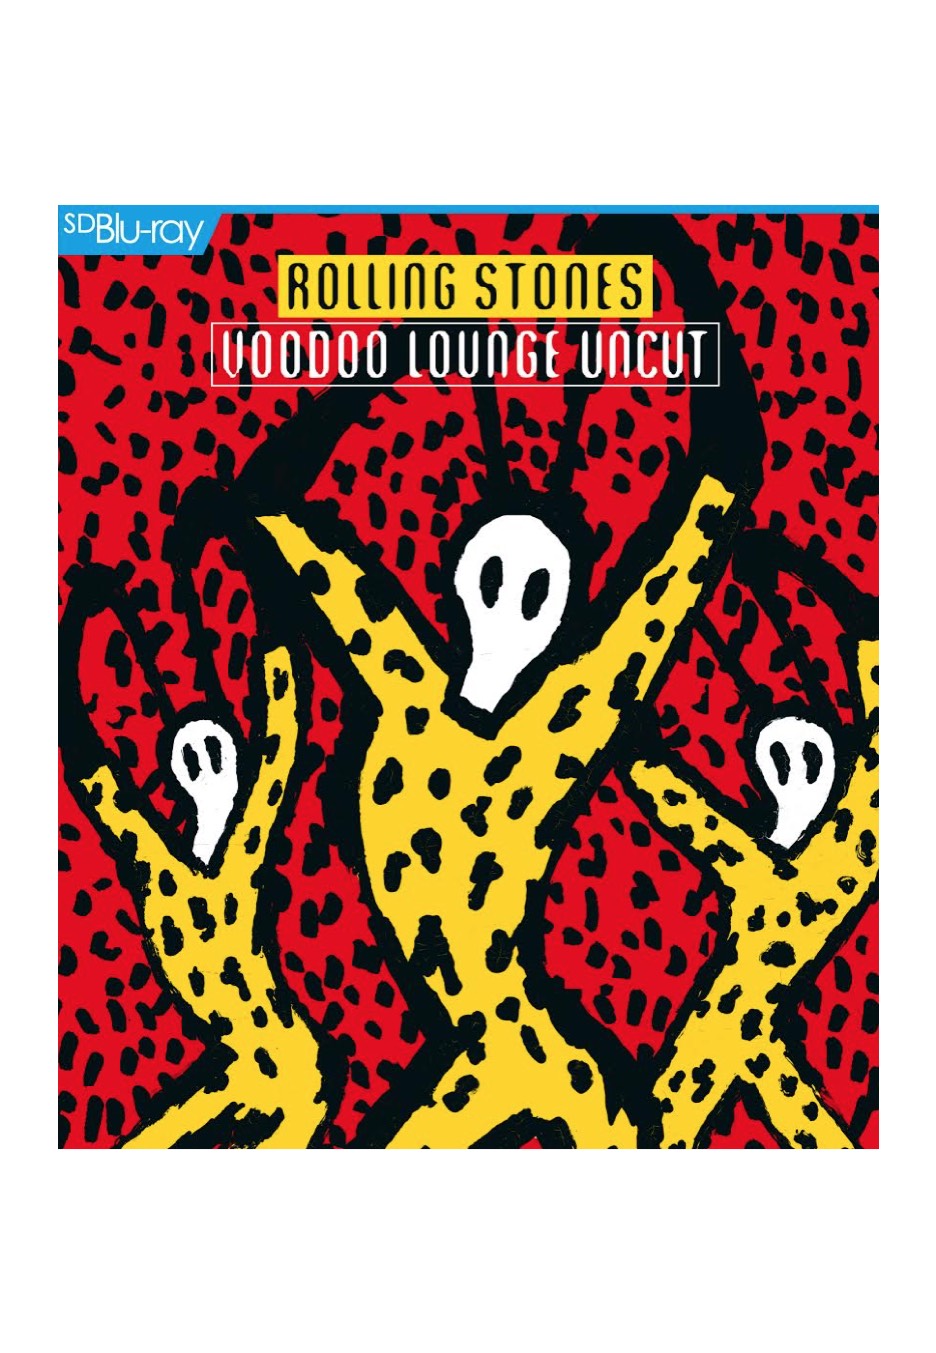 The Rolling Stones - Voodoo Lounge Uncut - Blu Ray | Neutral-Image